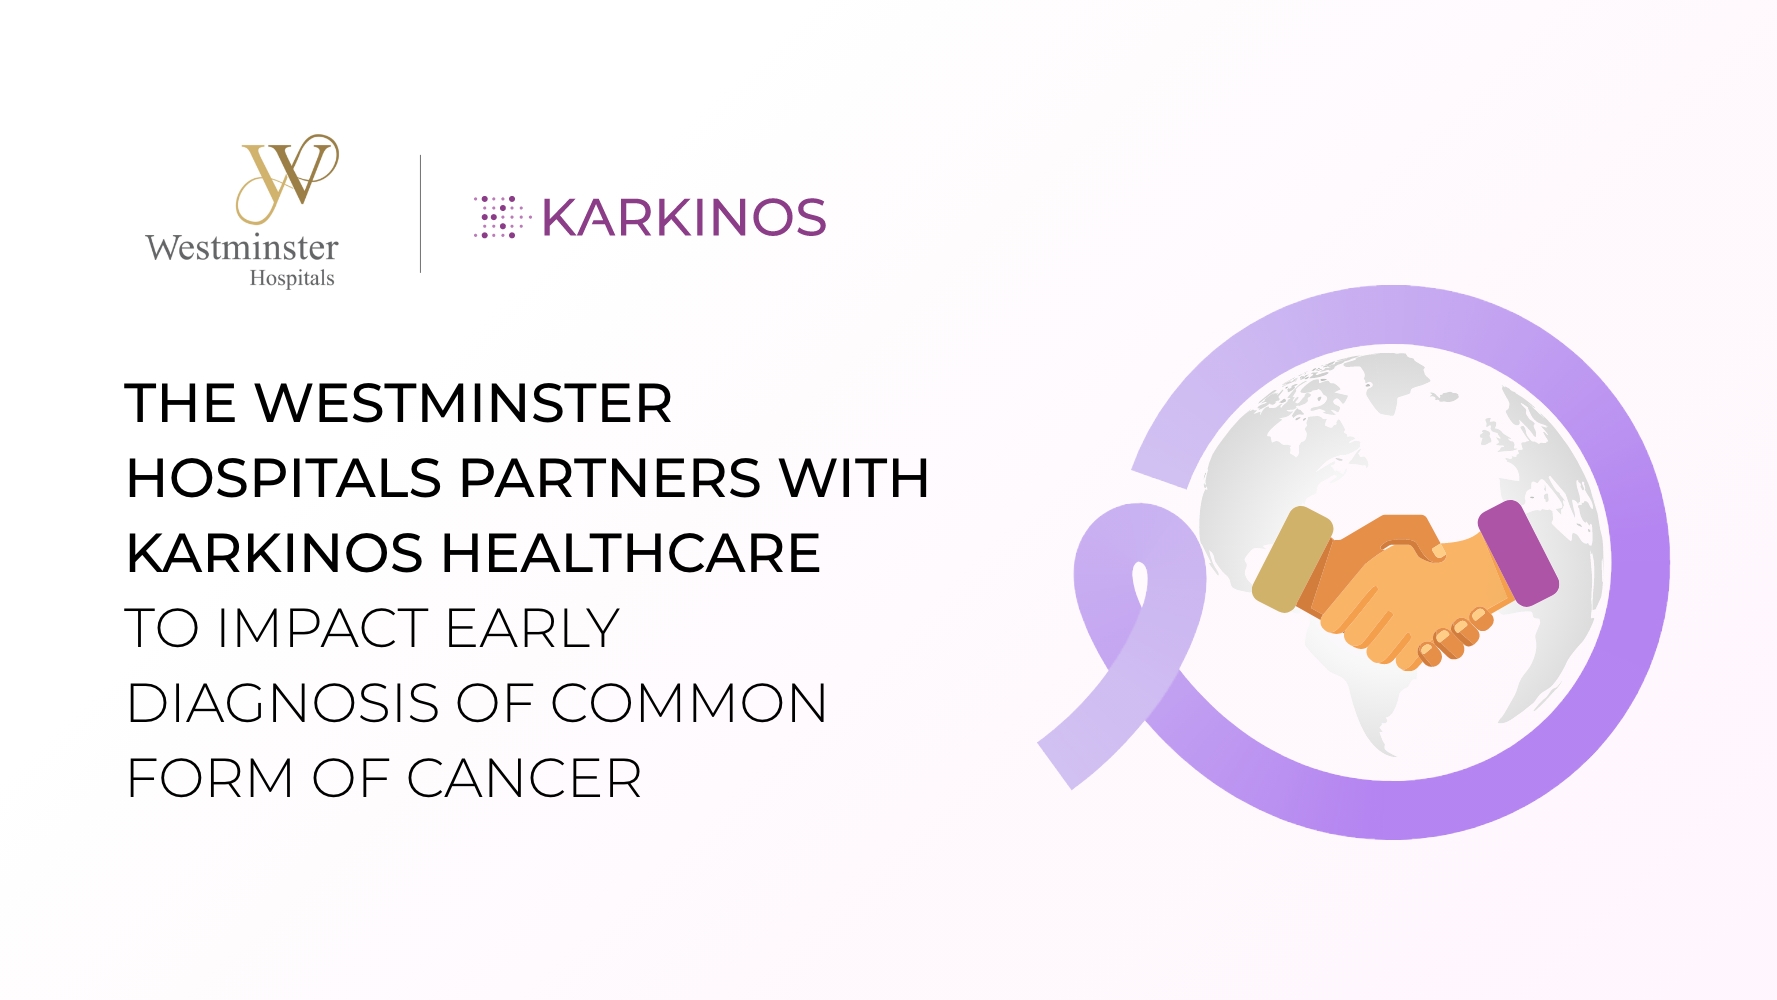 The Westminster Hospitals partners with Karkinos Healthcare to impact early diagnosis of common form of cancer